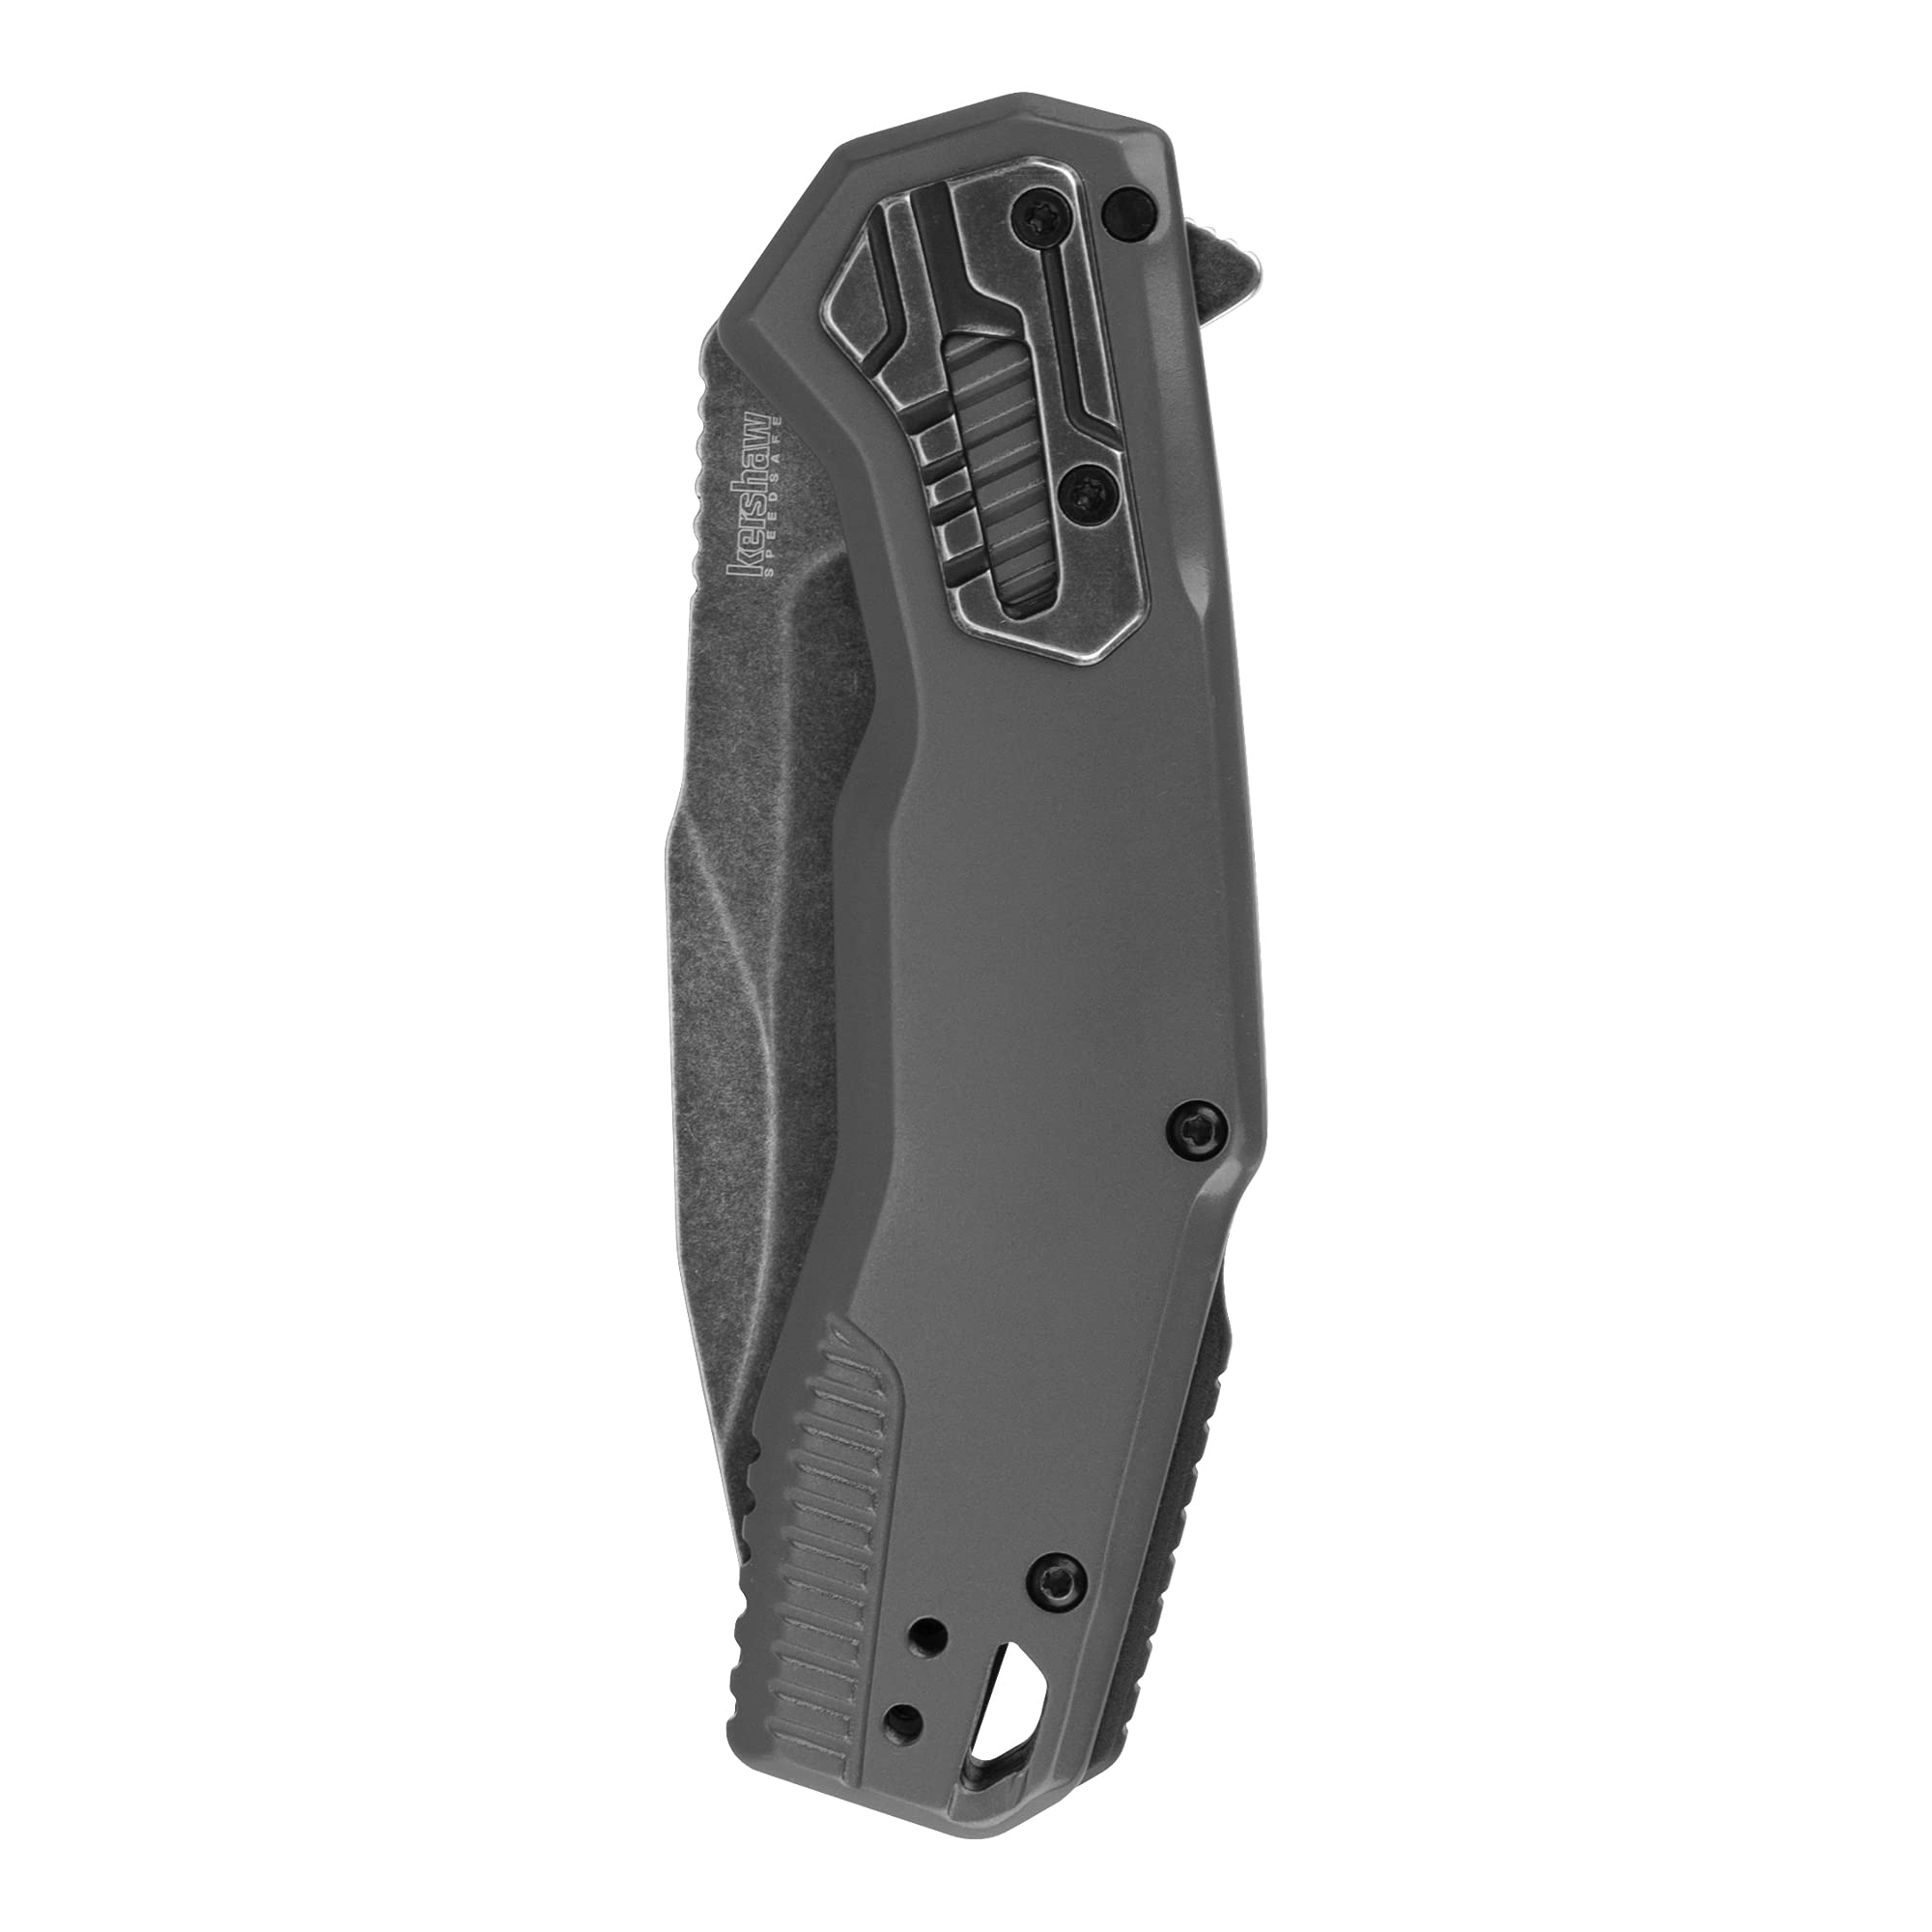 Kershaw Cannonball Pocket Knife, 3.5" D2 Carbon Steel Drop Point Blade, assisted opening with Flipper, Frame Lock, EDC